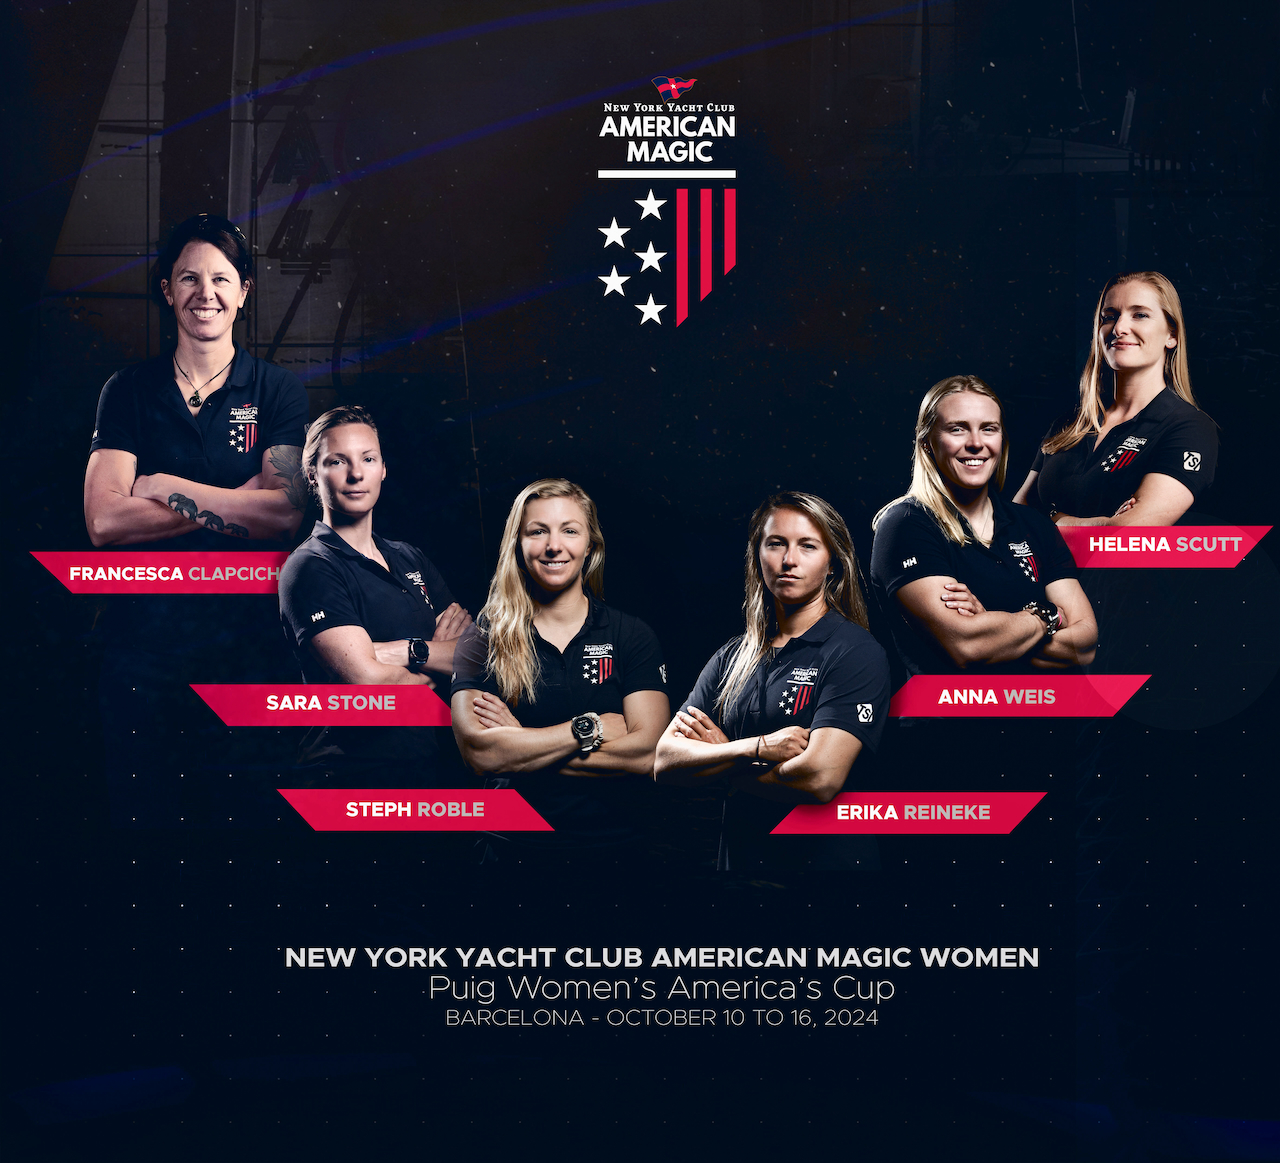 New York Yacht Club American Magic Women’s Team for the Puig Women’s America’s Cup 2024